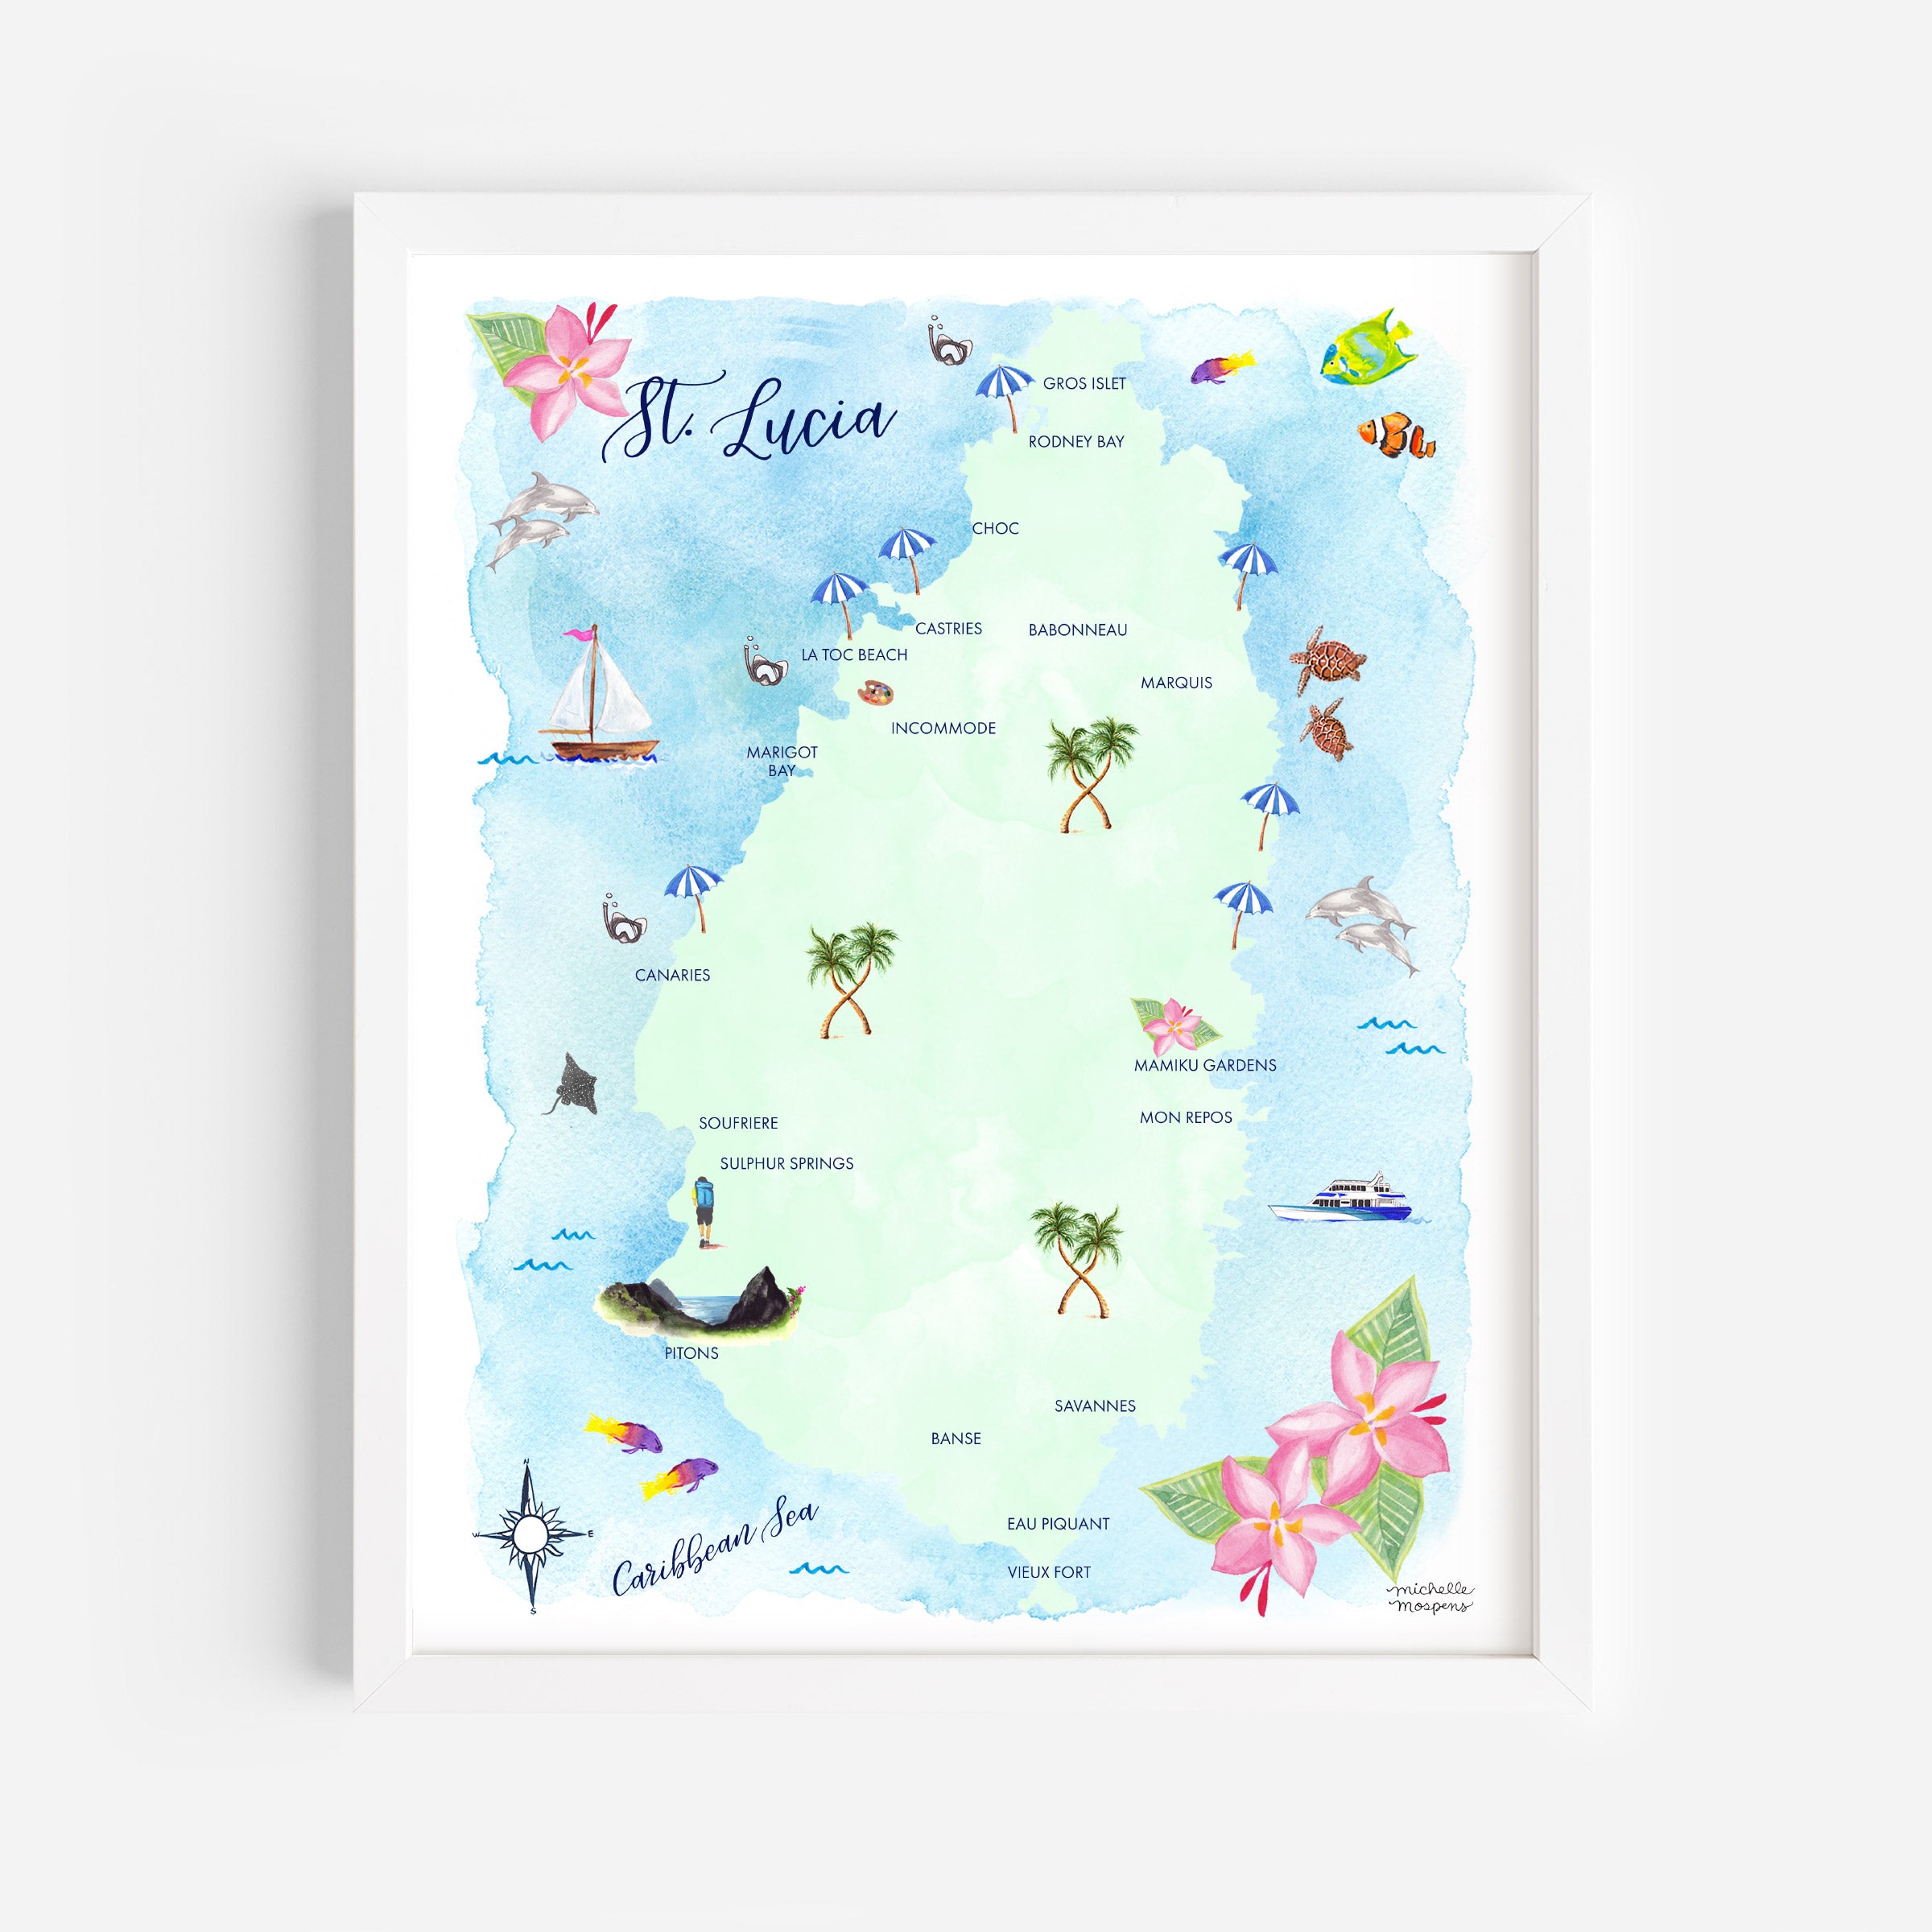 St. Lucia Map Art Print - Watercolor by Michelle Mospens